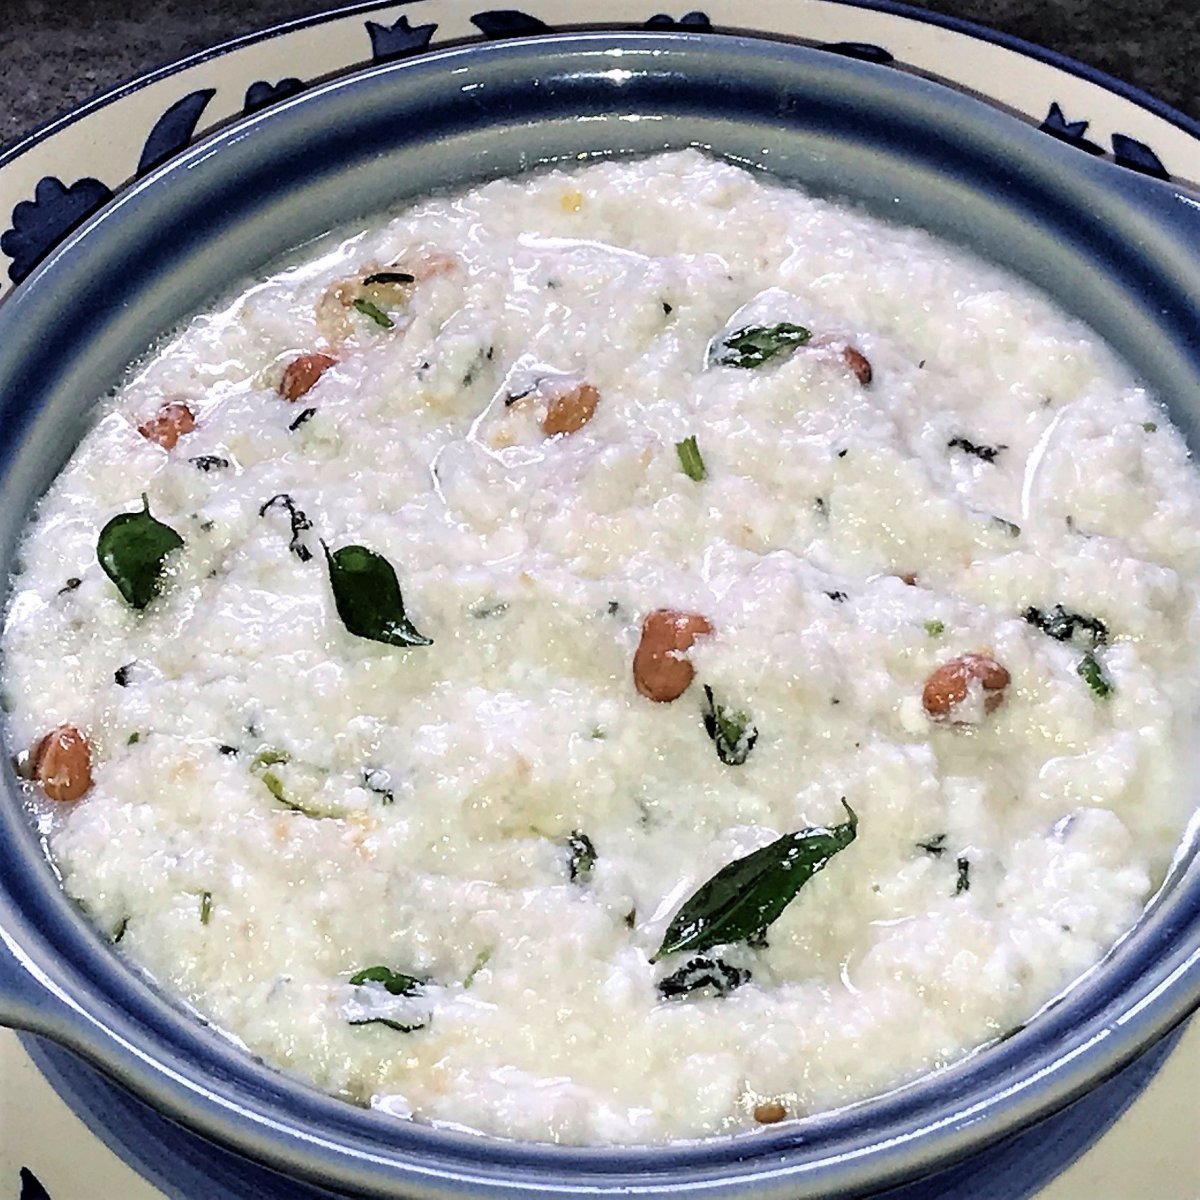 South Indian Curd Rice Recipe for Vrat (Festival) Fasting